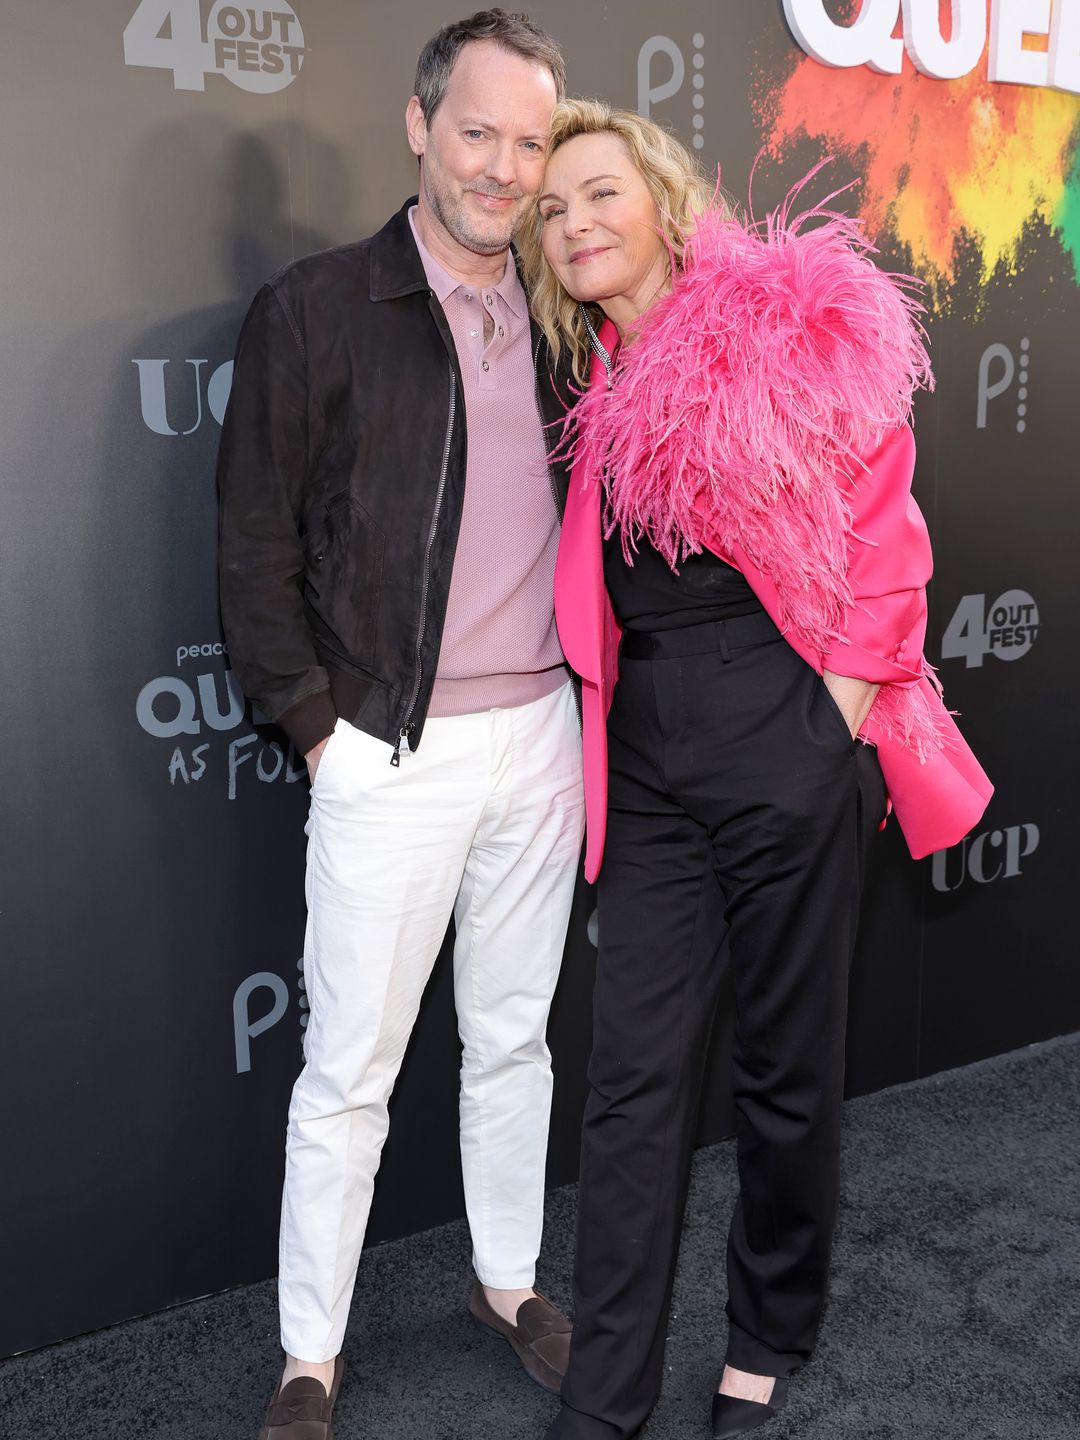 The couple smiling while attending the premiere of Peacock's Queer As Folk in 2022